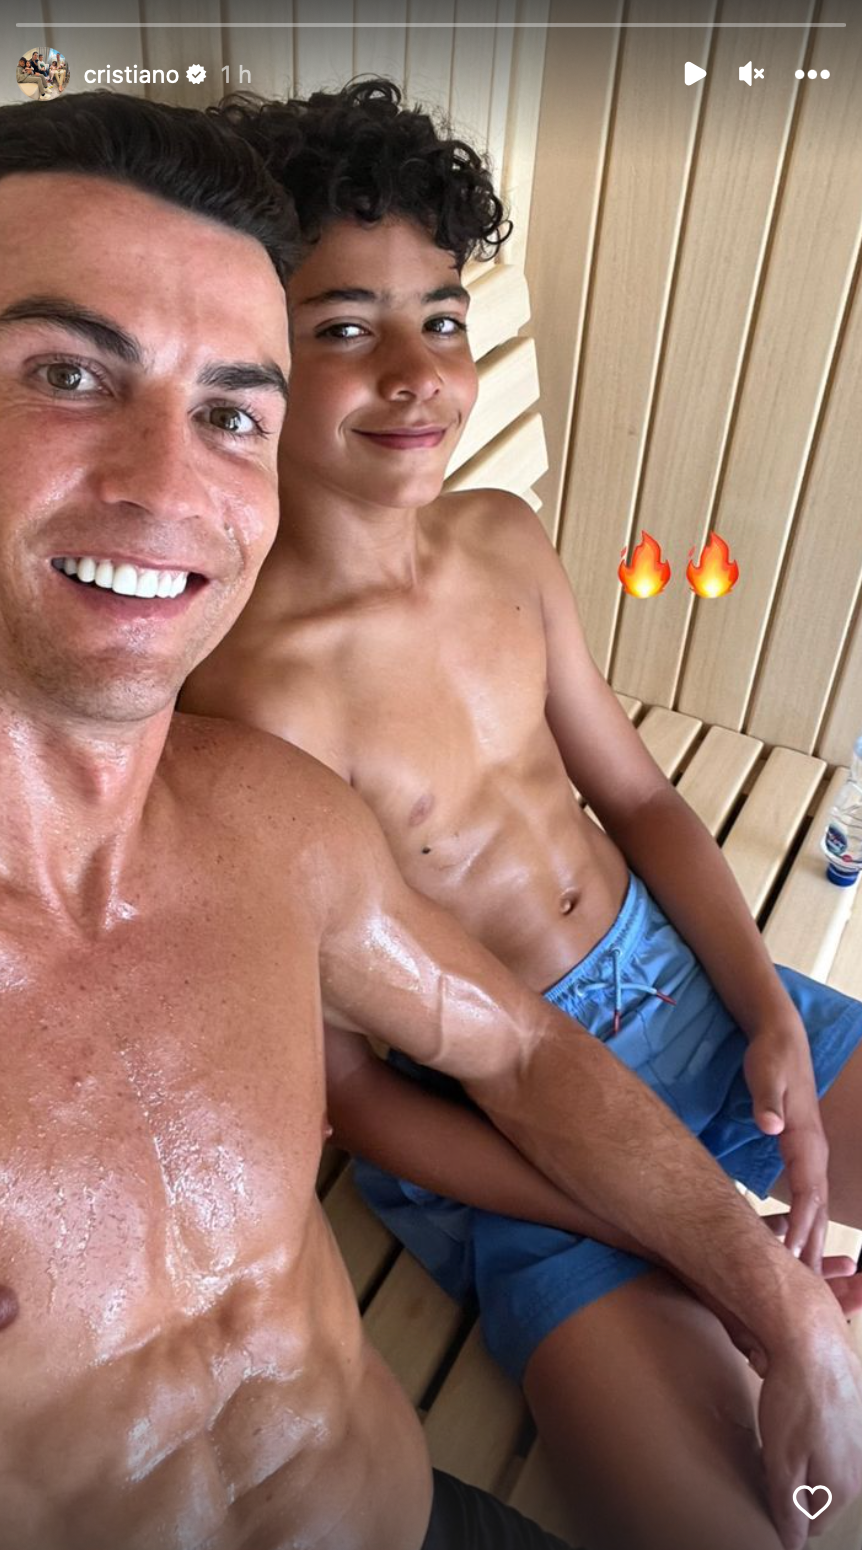 Cristiano Ronaldo works up a sweat as he chills in sauna with Ronaldo Jr after Georgina Rodriguez watches her son in action Goal Malaysia